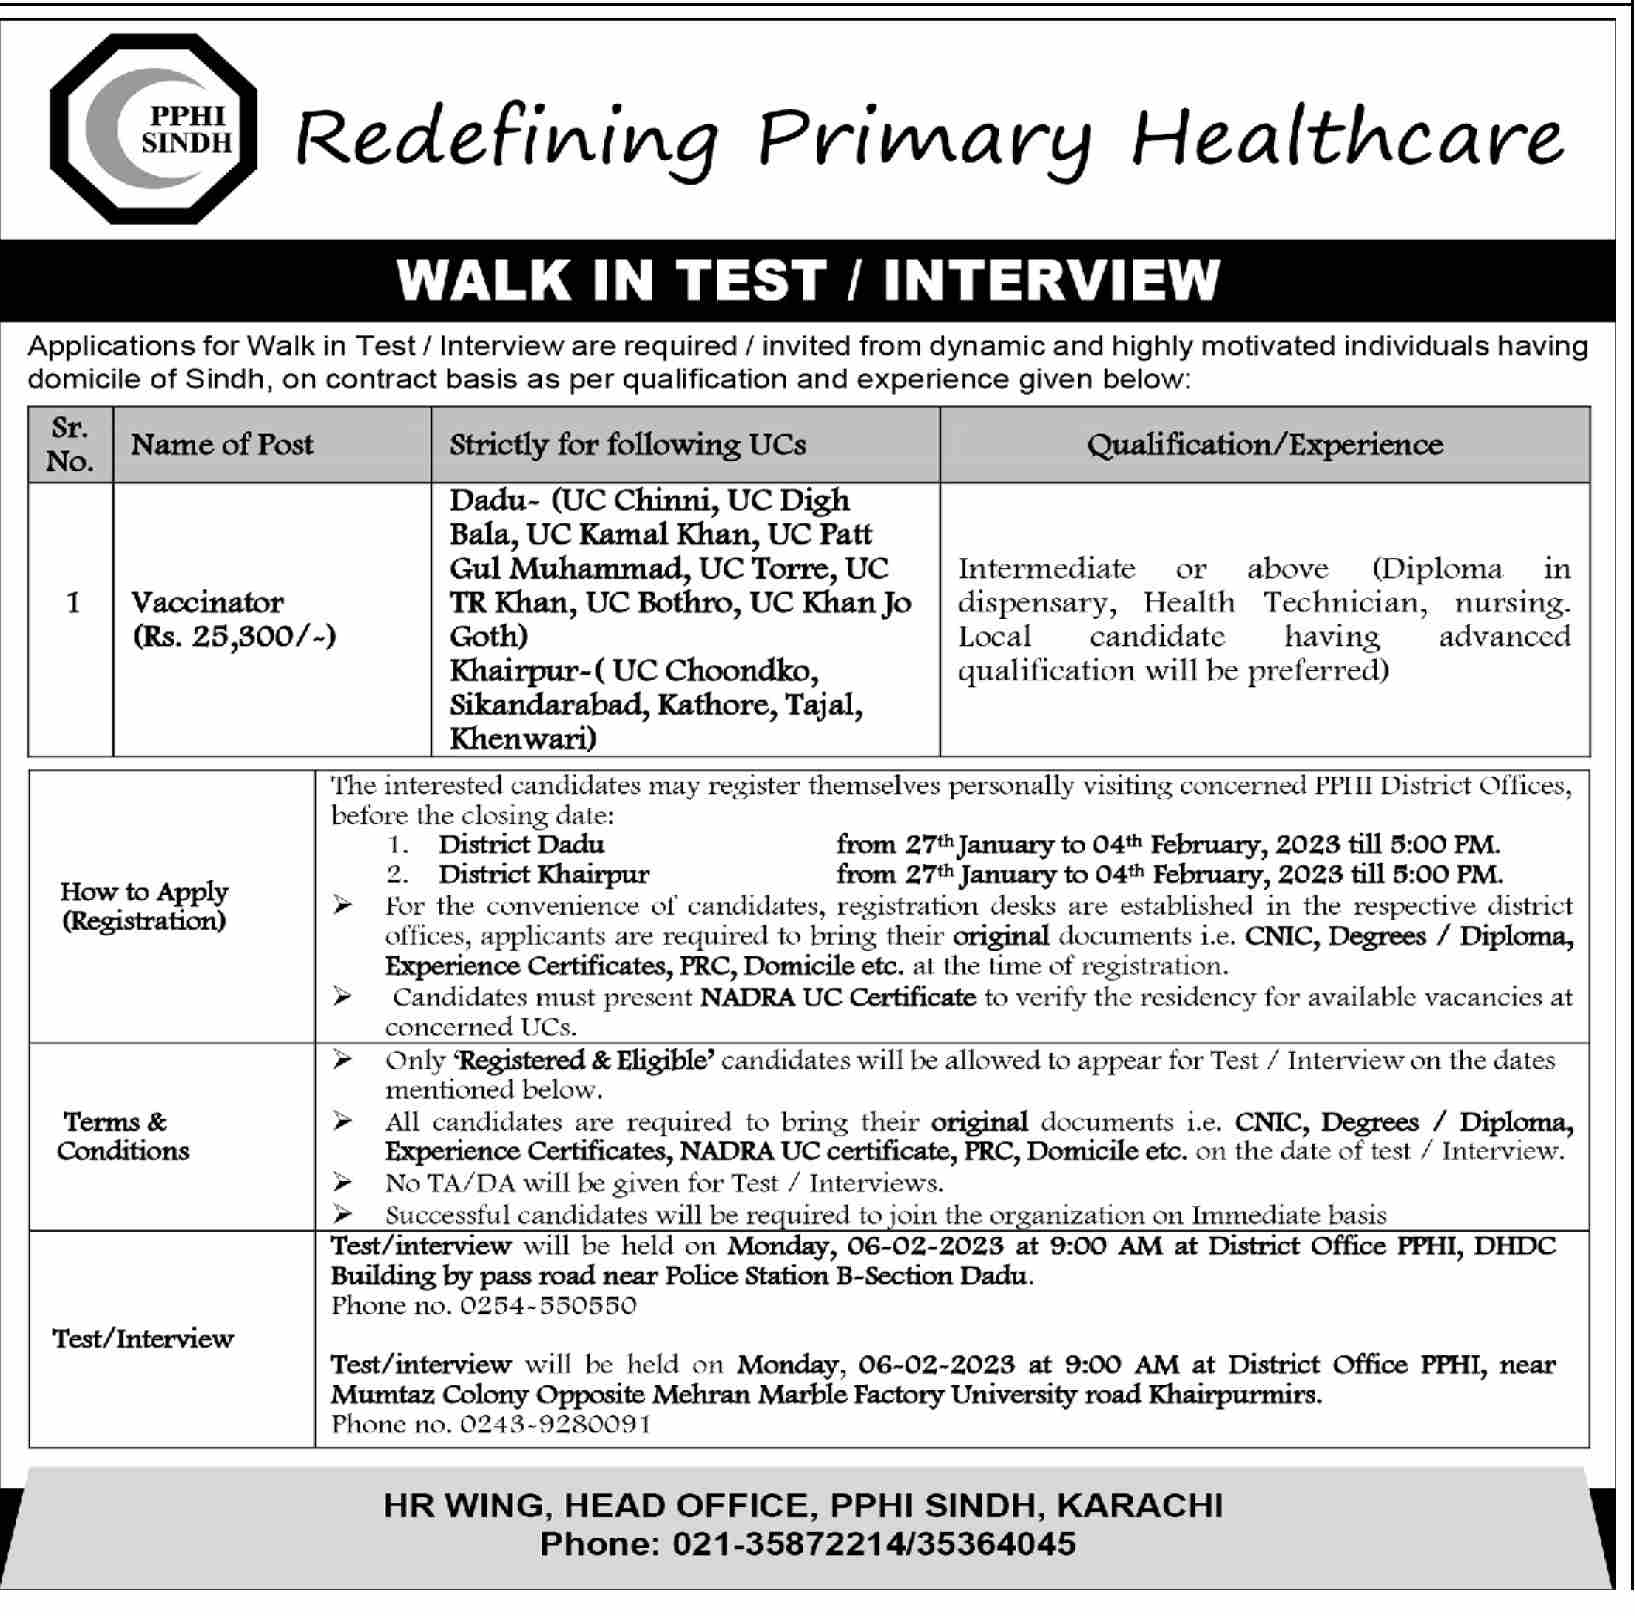 PPHI Sindh Government Jobs 2023 – Redefining Primary Healthcare Karachi Jobs 2023